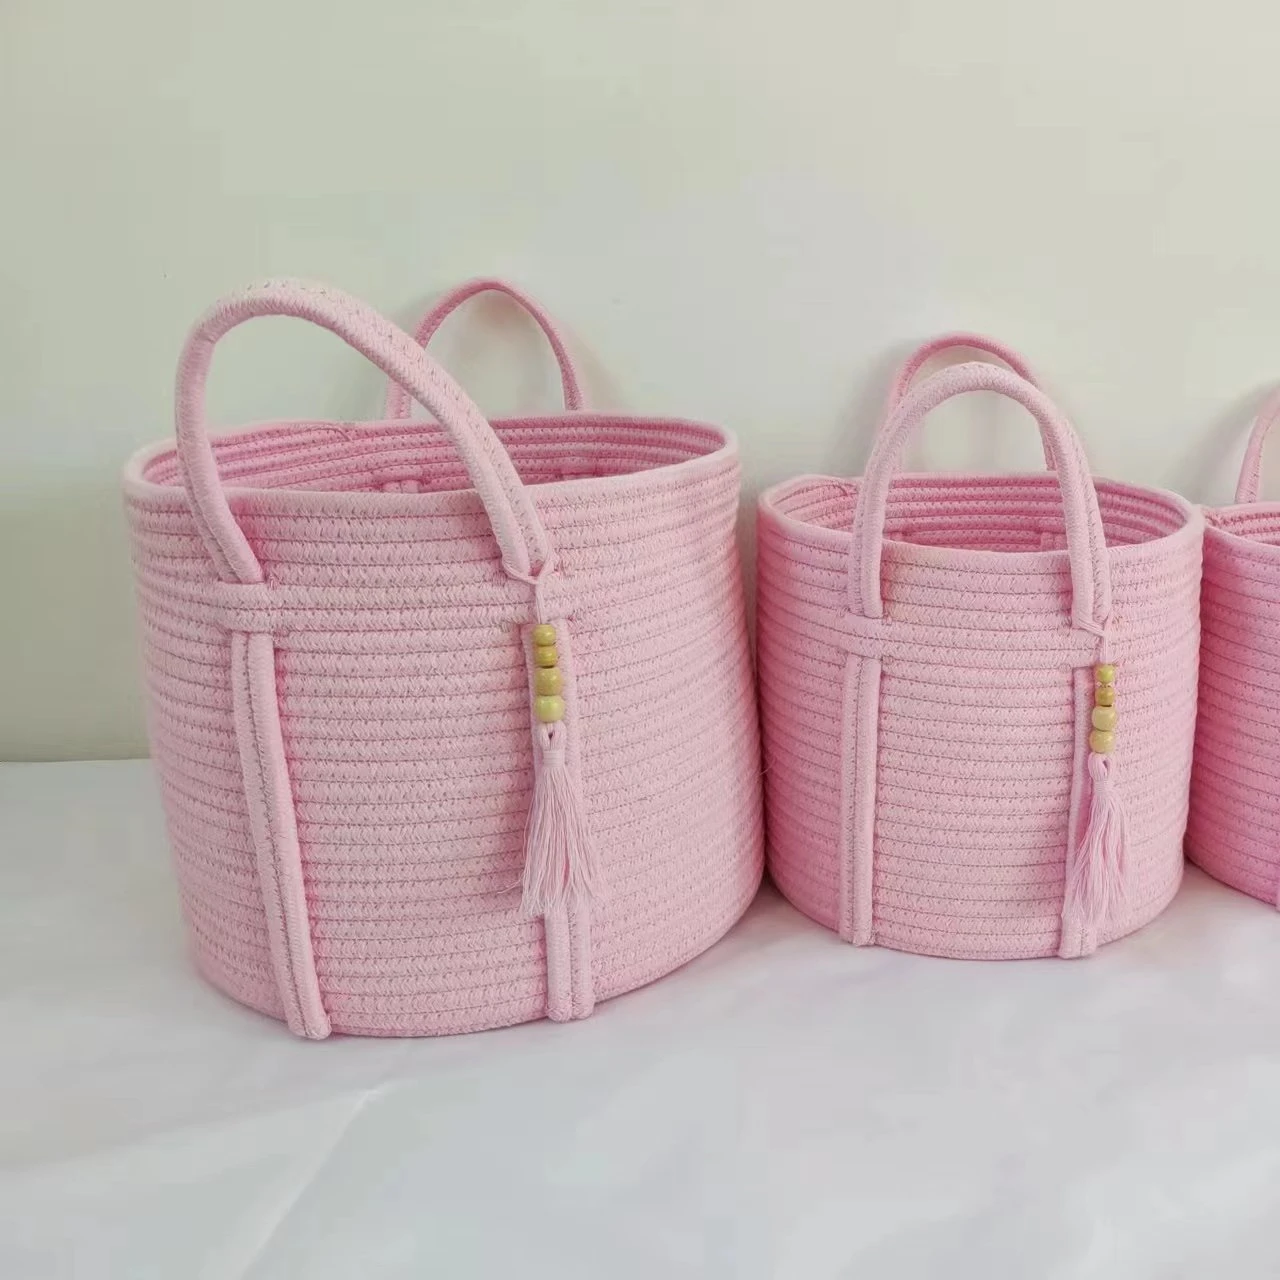 Handmade Eco-Friendly  Bright Pink Color Coiled Large Cotton Rope Nursery Blanket Laundry Hamper Basket